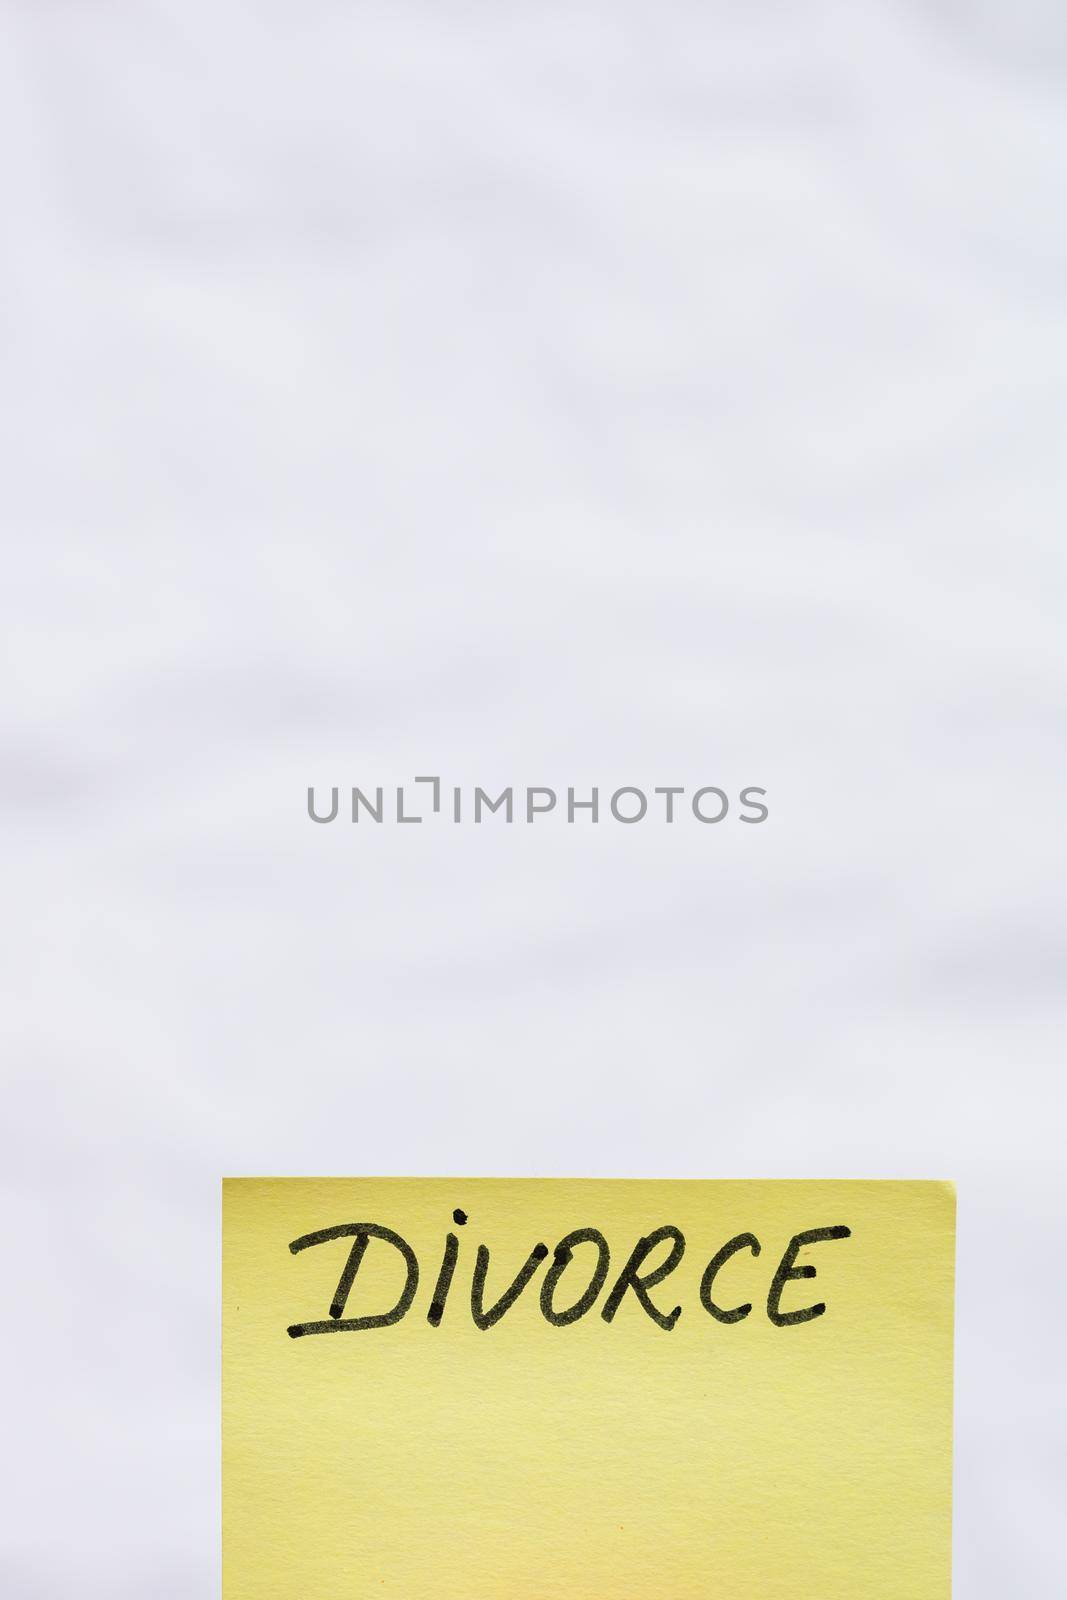  Divorce handwriting text close up isolated on yellow paper with copy space. by vladispas